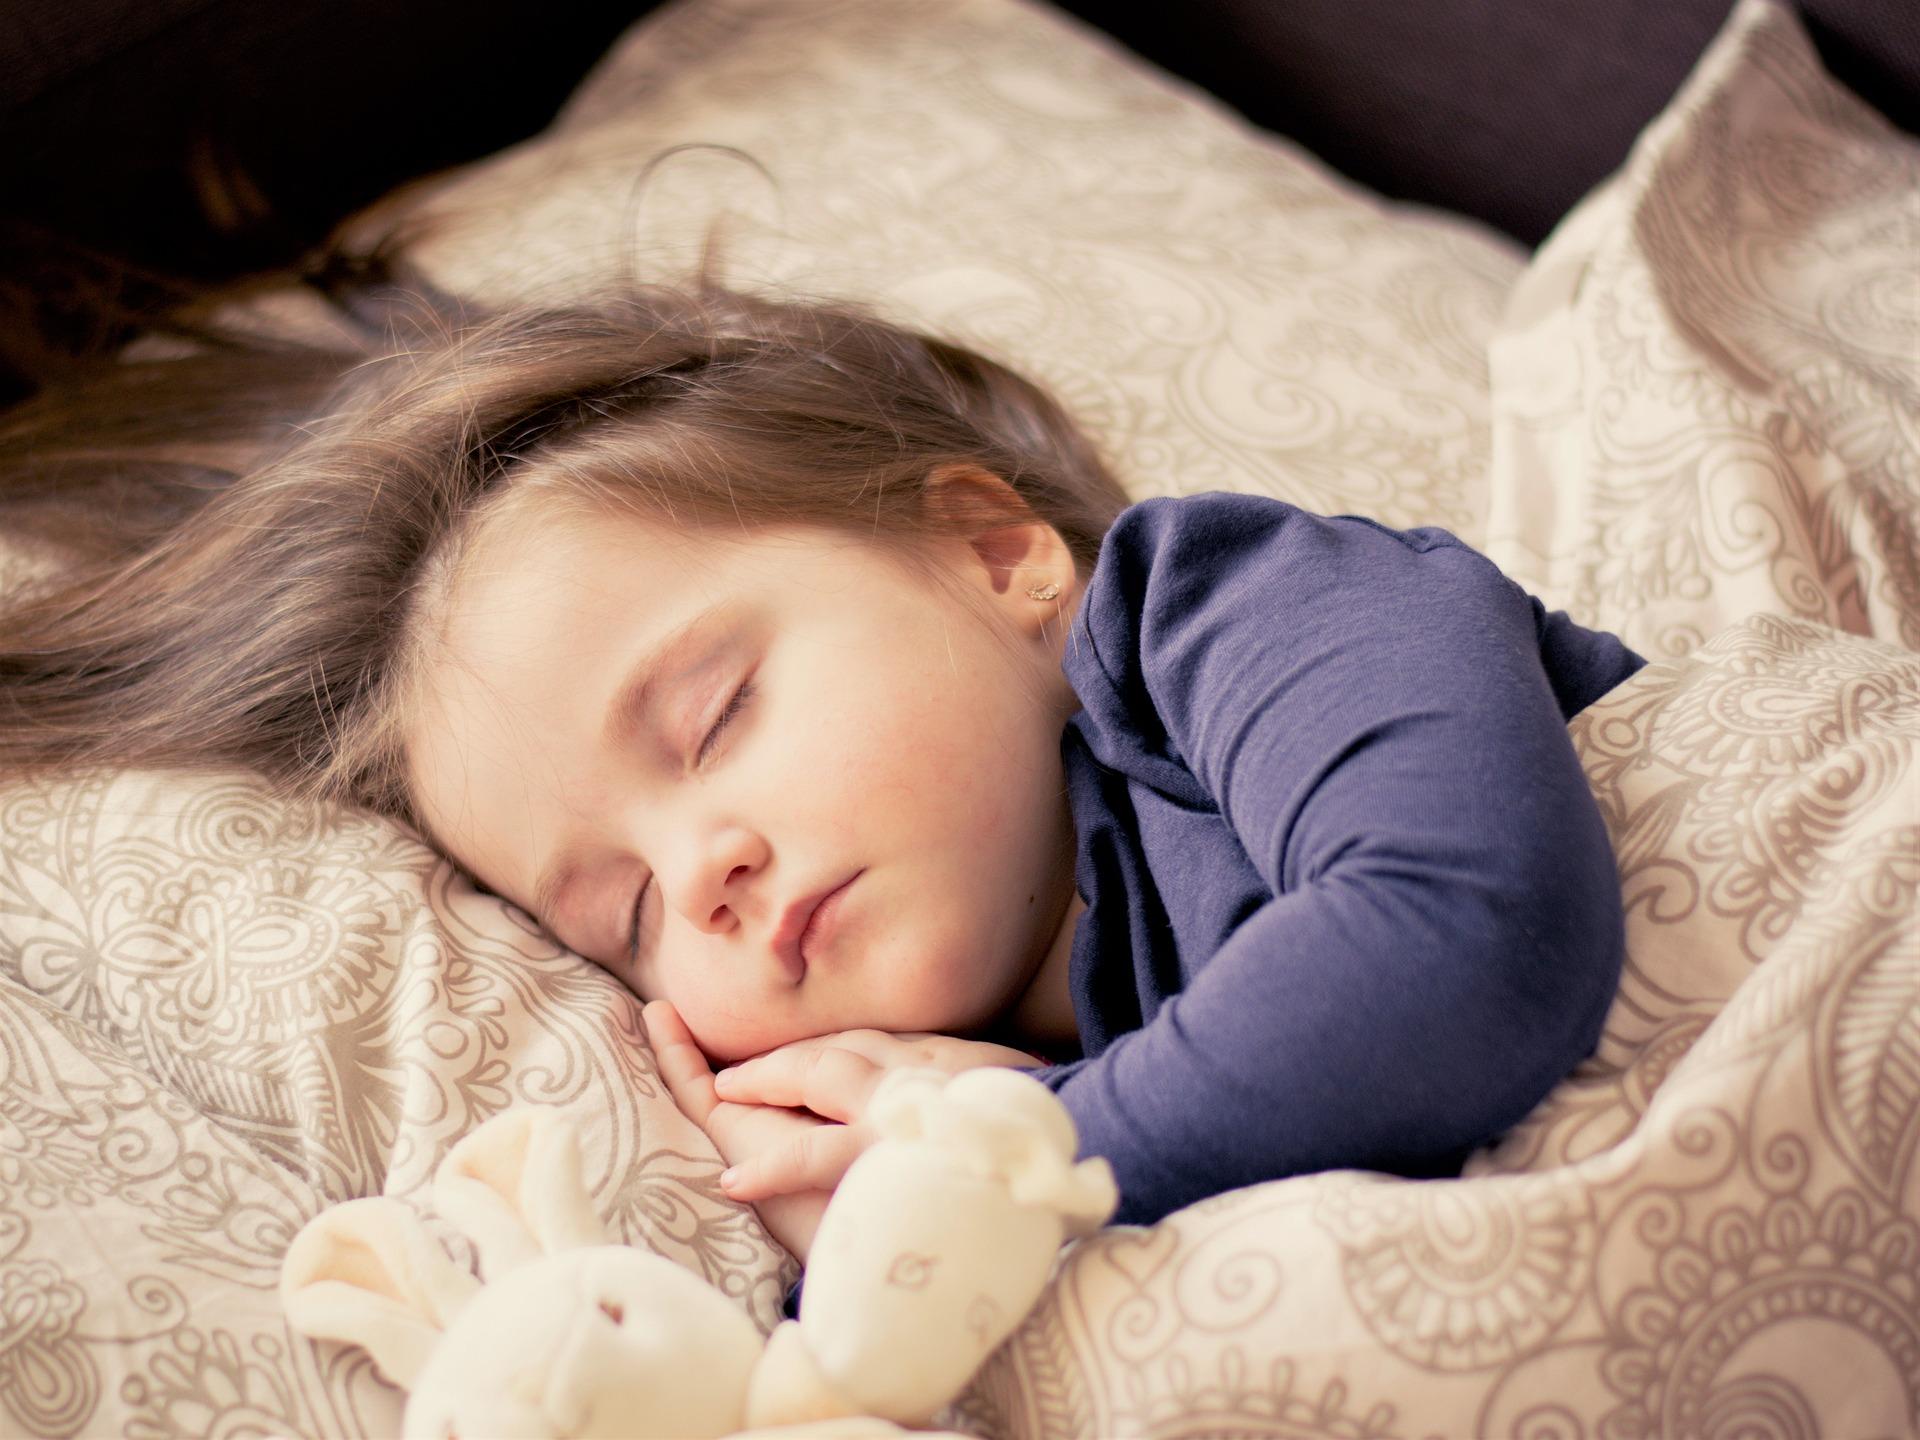 A young girl toddler sleeping in bed with her bunny soft toy - Adopt a newborn vs adopt a toddler - Baby Journey